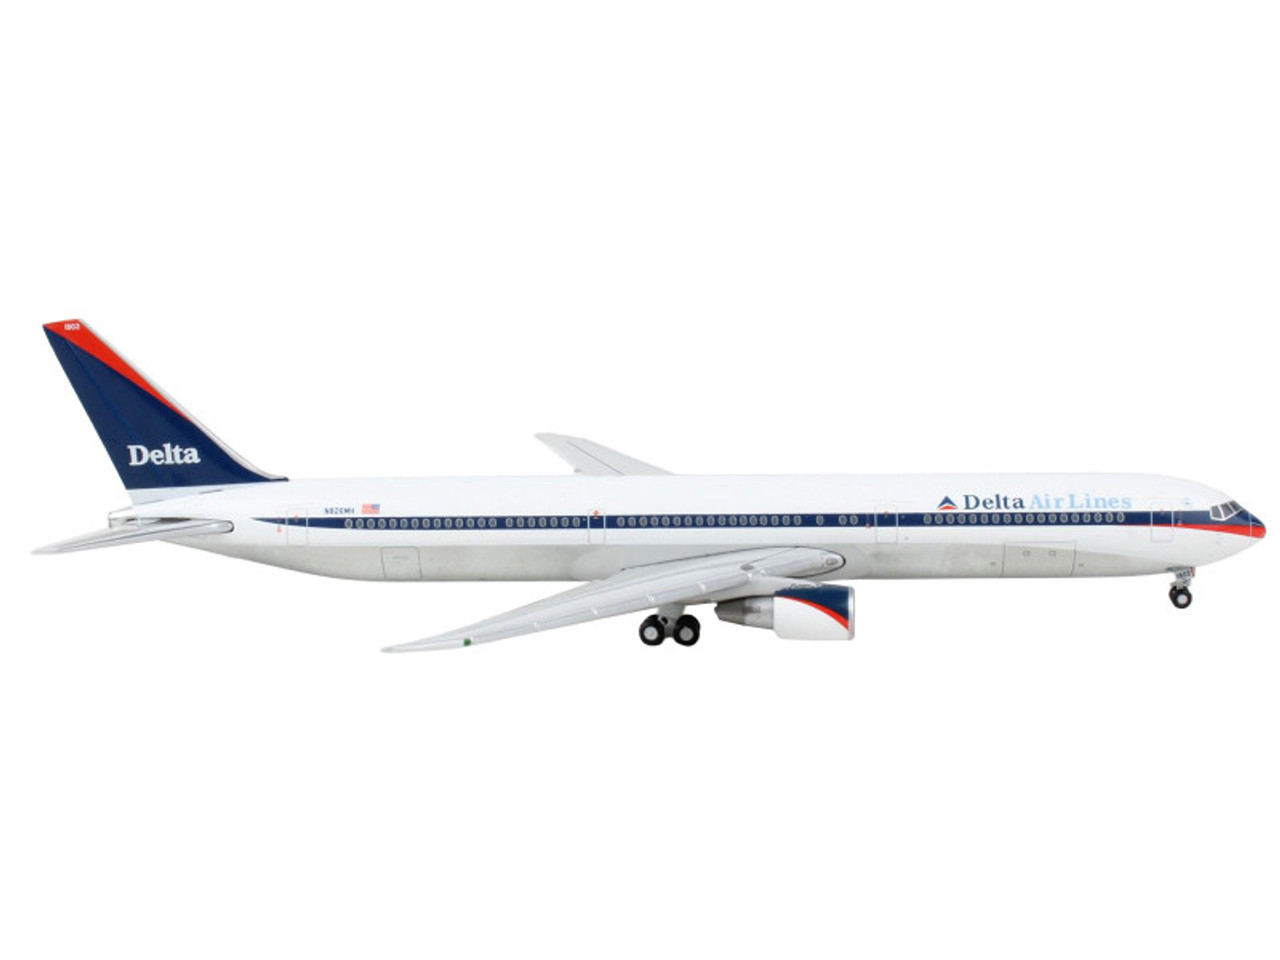 Boeing 767-400ER Commercial Aircraft "Delta Airlines - Interim Livery" White with Blue Stripes 1/400 Diecast Model Airplane by GeminiJets